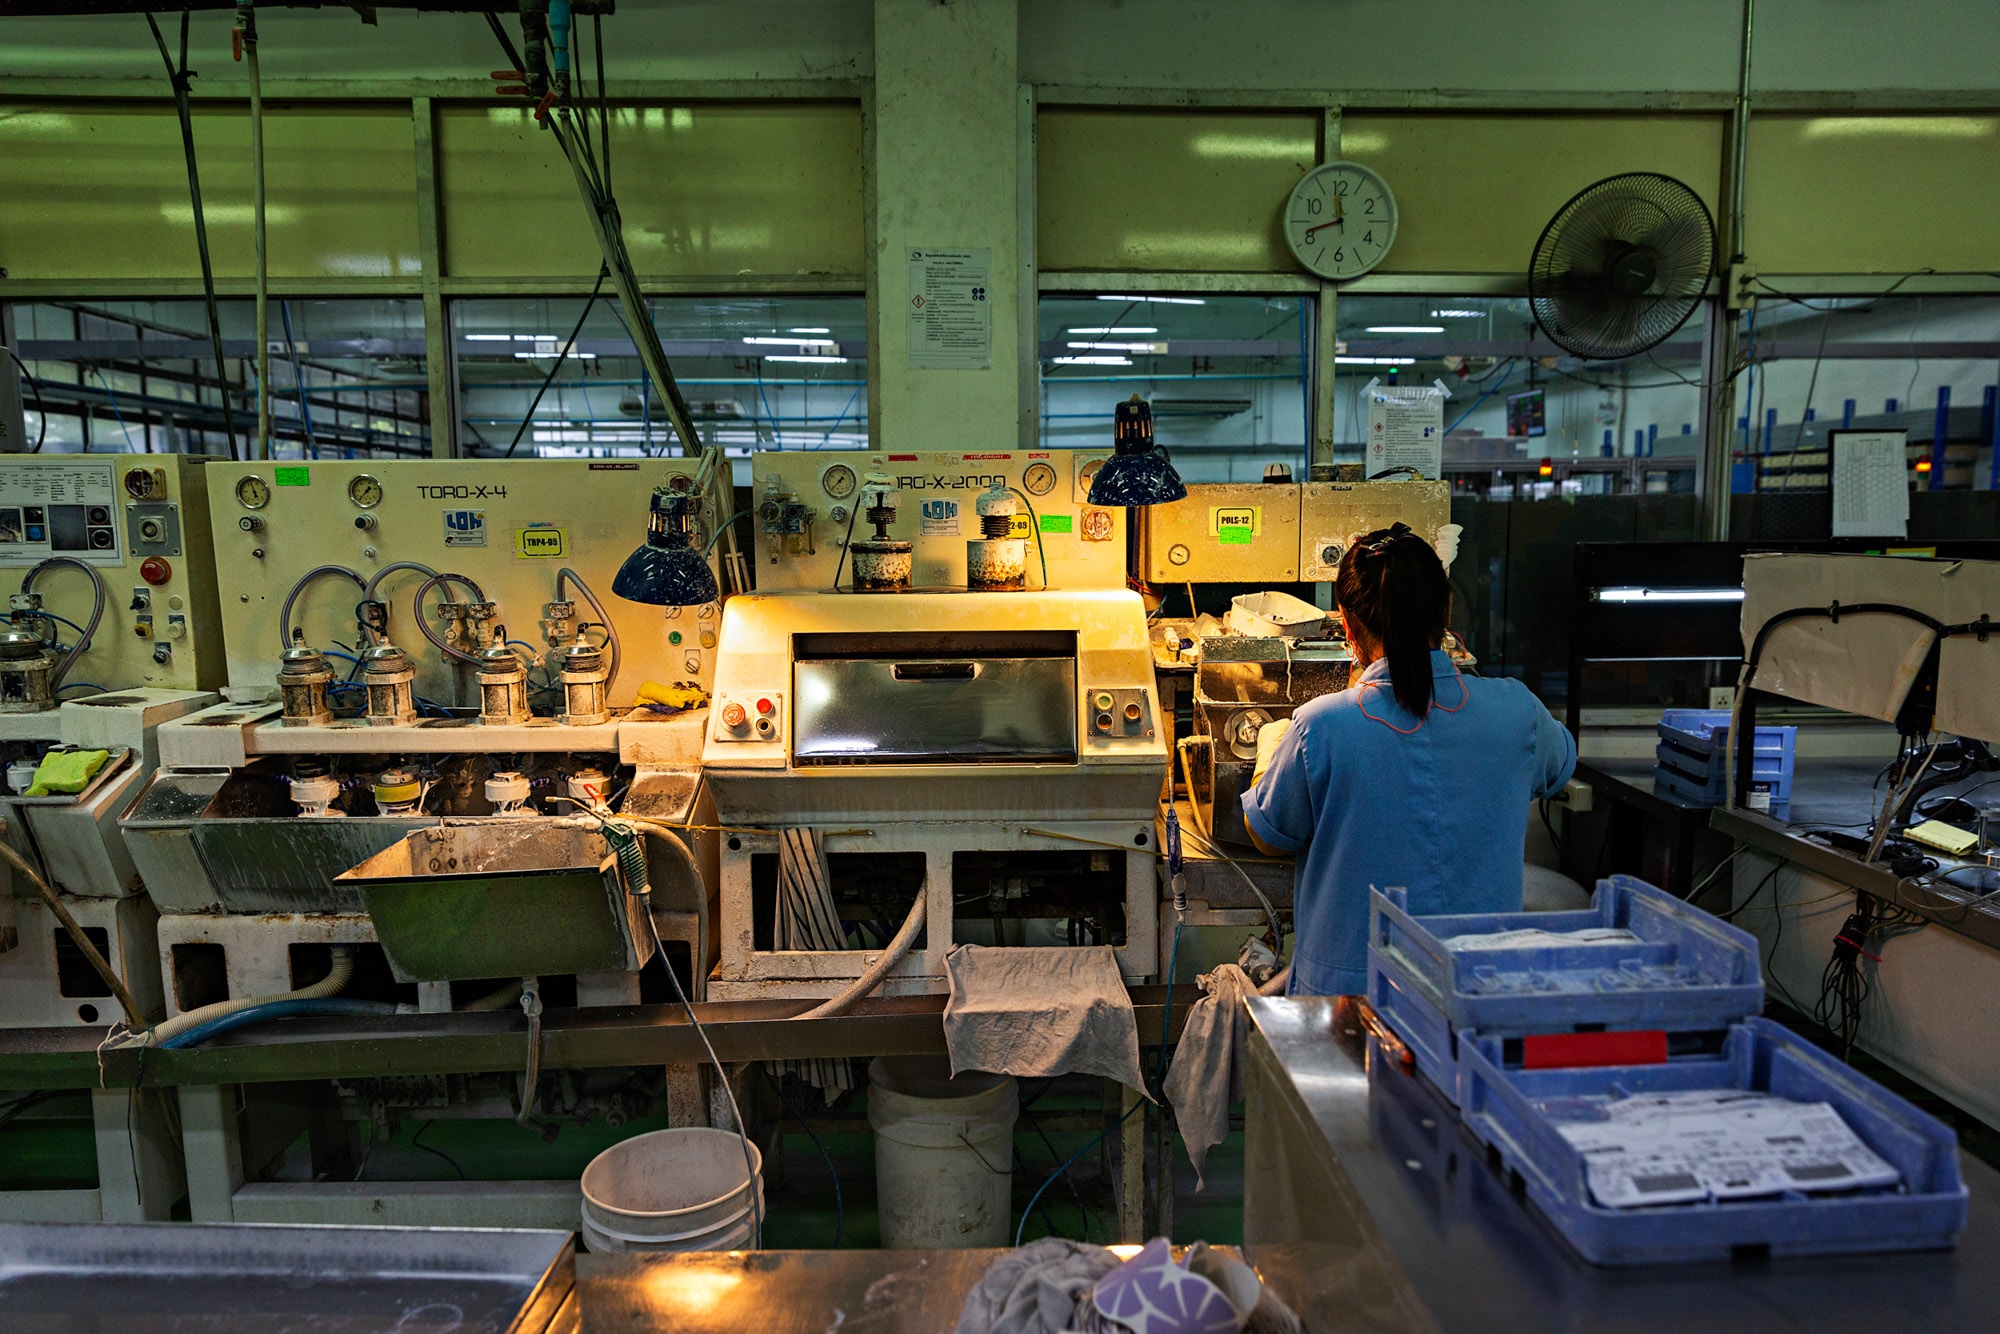 Thailand Glasses Factory: Stern - An employee treats lenses Brille24’s old TOG...